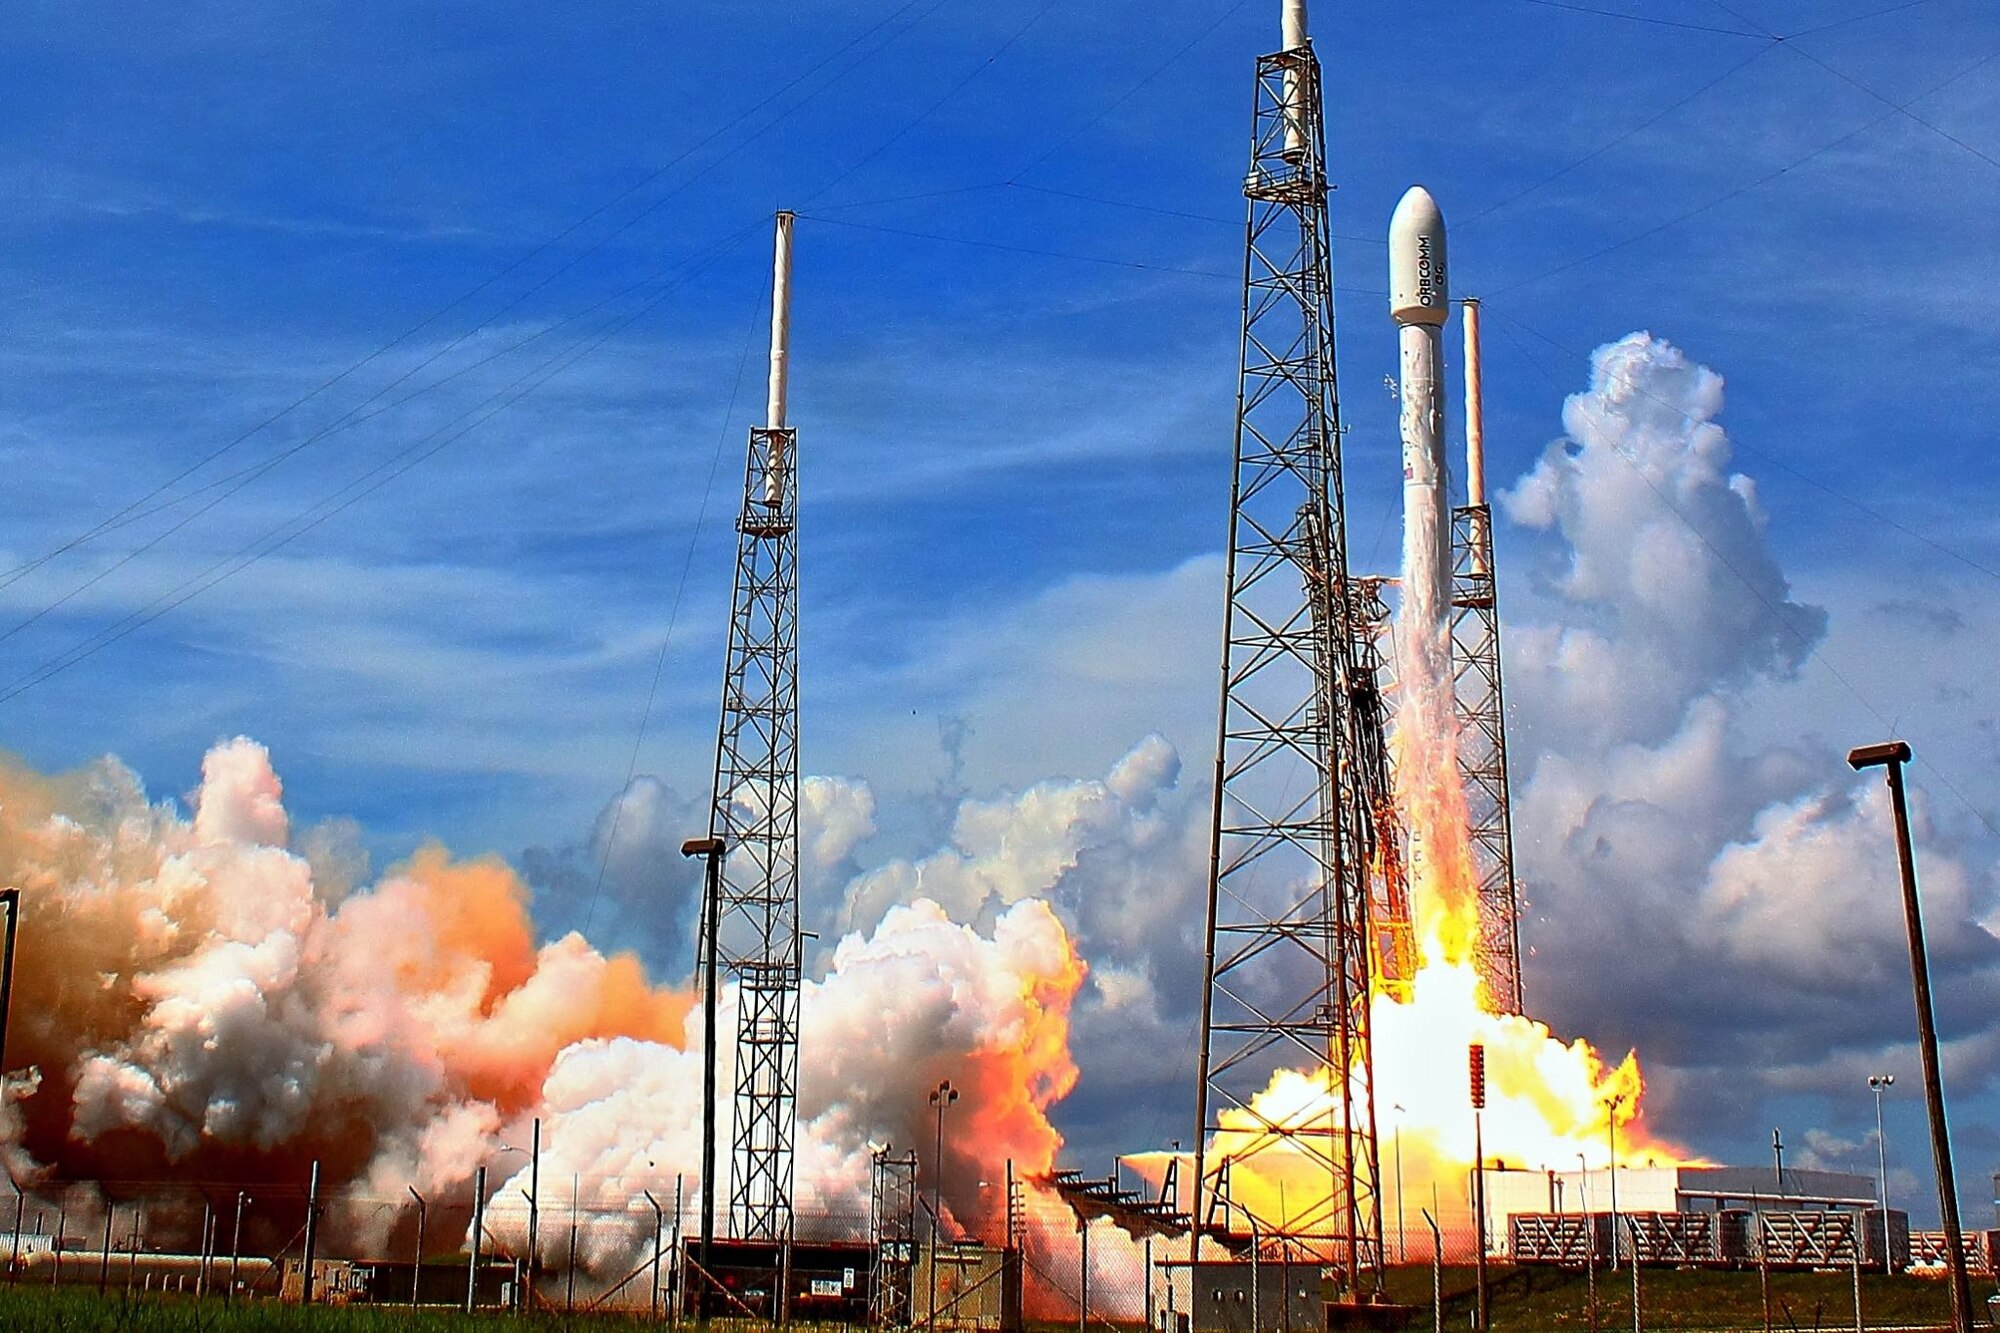 The 45th Space Wing supported Space Exploration Technologies' successfully launches a Falcon 9 rocket carrying six second-generation ORBCOMM communications satellites July 14, 2014, from Space Launch Complex 40, at Cape Canaveral Air Force Station, Fla. (Courtesy photo/Alan Walters)